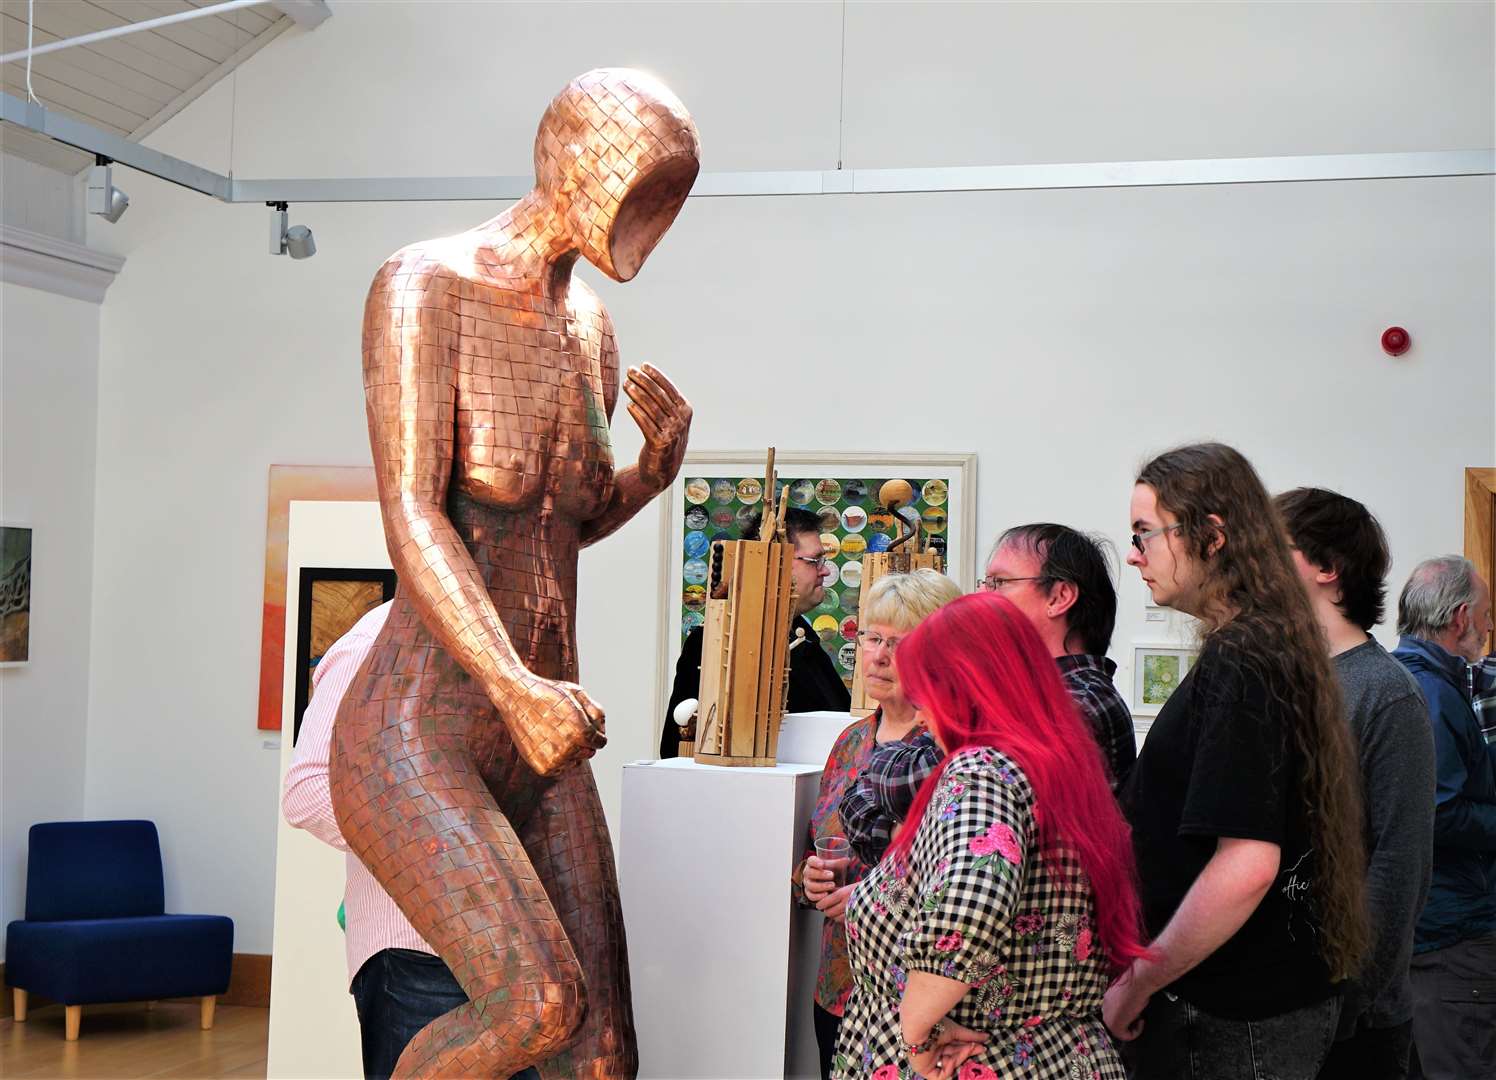 The huge sculpture created in mixed media by Keith Coghill greets visitors in the gallery. Picture: DGS